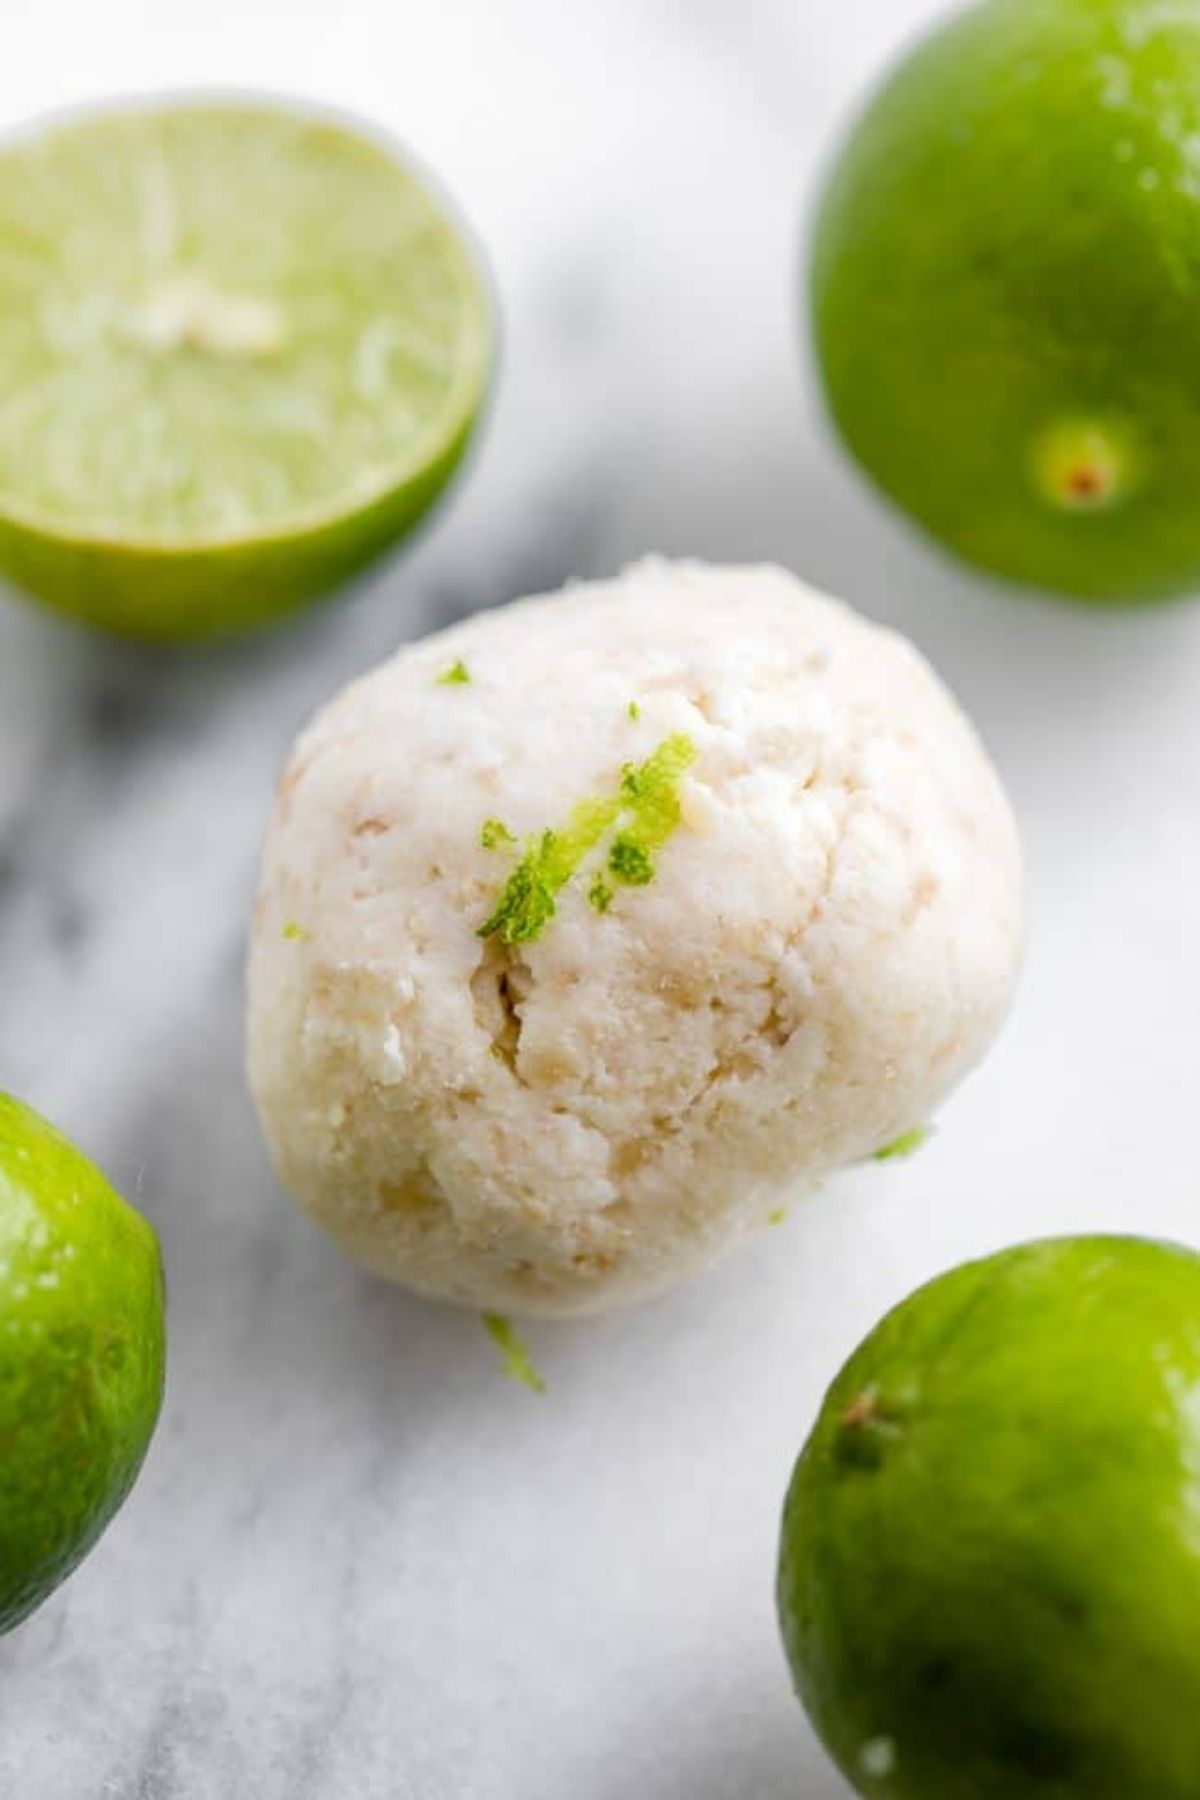 A bal of key lime pie dough surrounded with limes